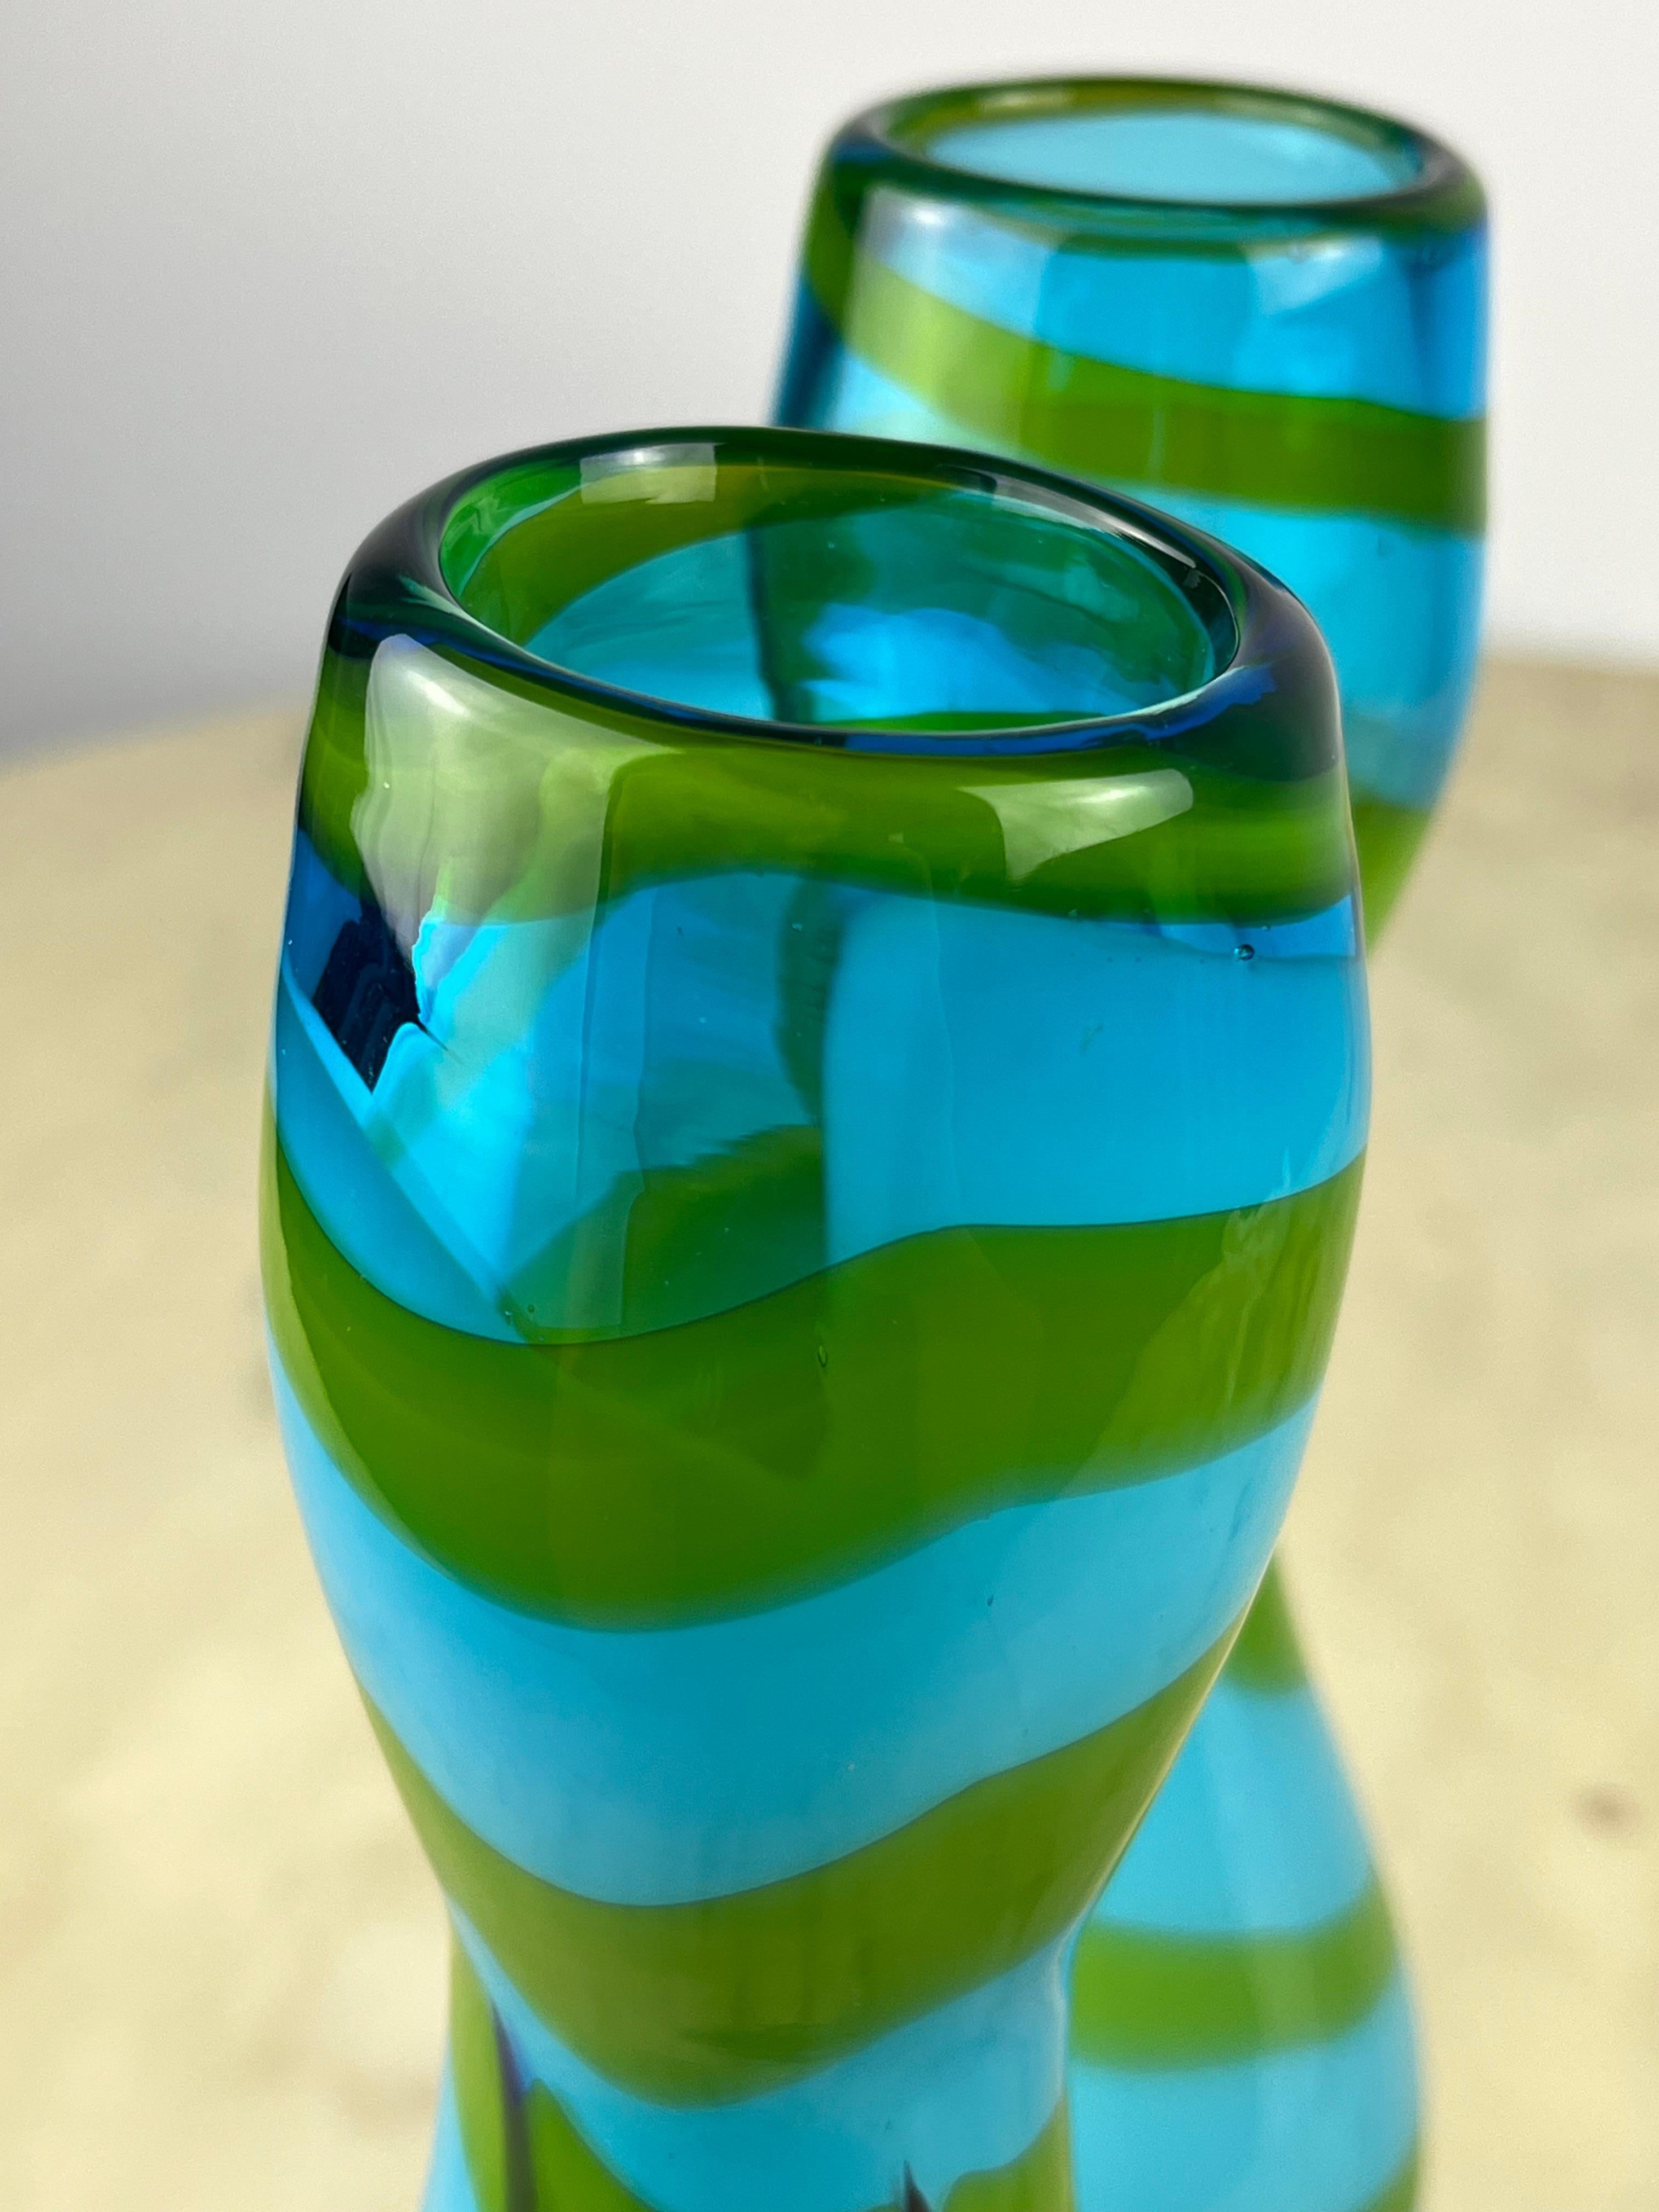 Pair of Polychrome Murano Vases Attributed To Gio Ponti 1970s For Sale 2